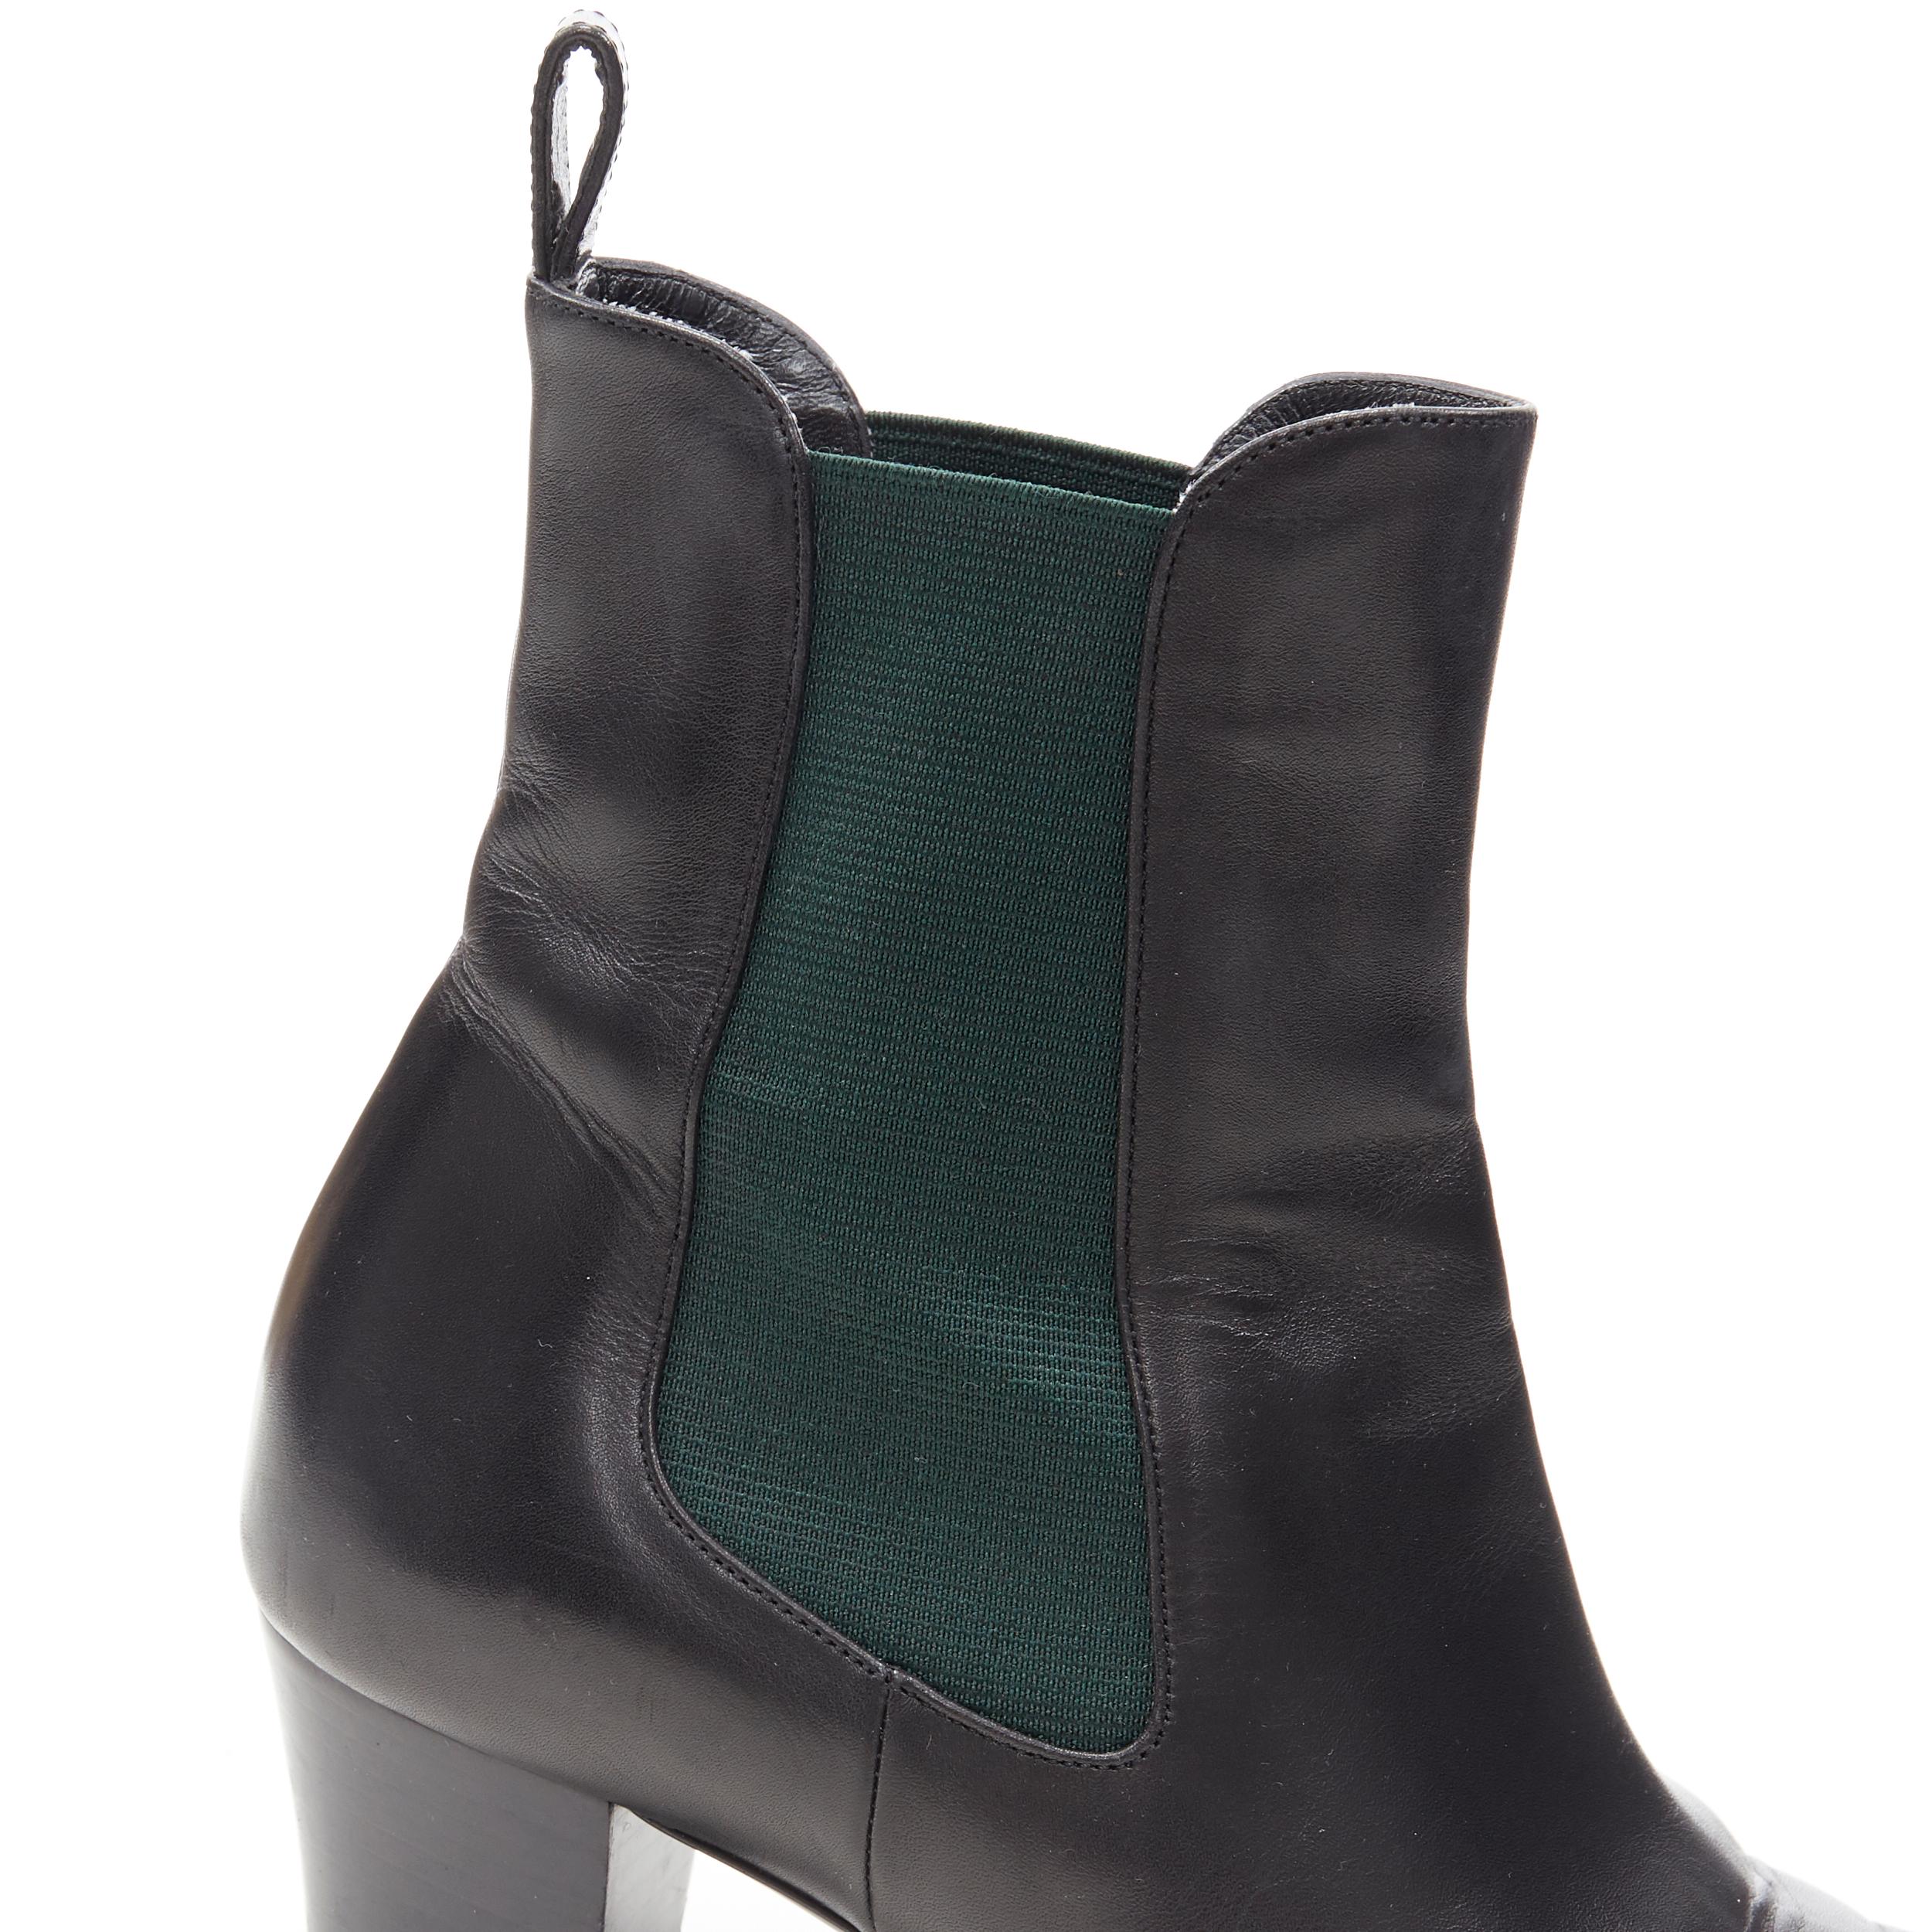 GUCCI black leather green elastic gusset pointed toe block heel ankle boot EU38 4